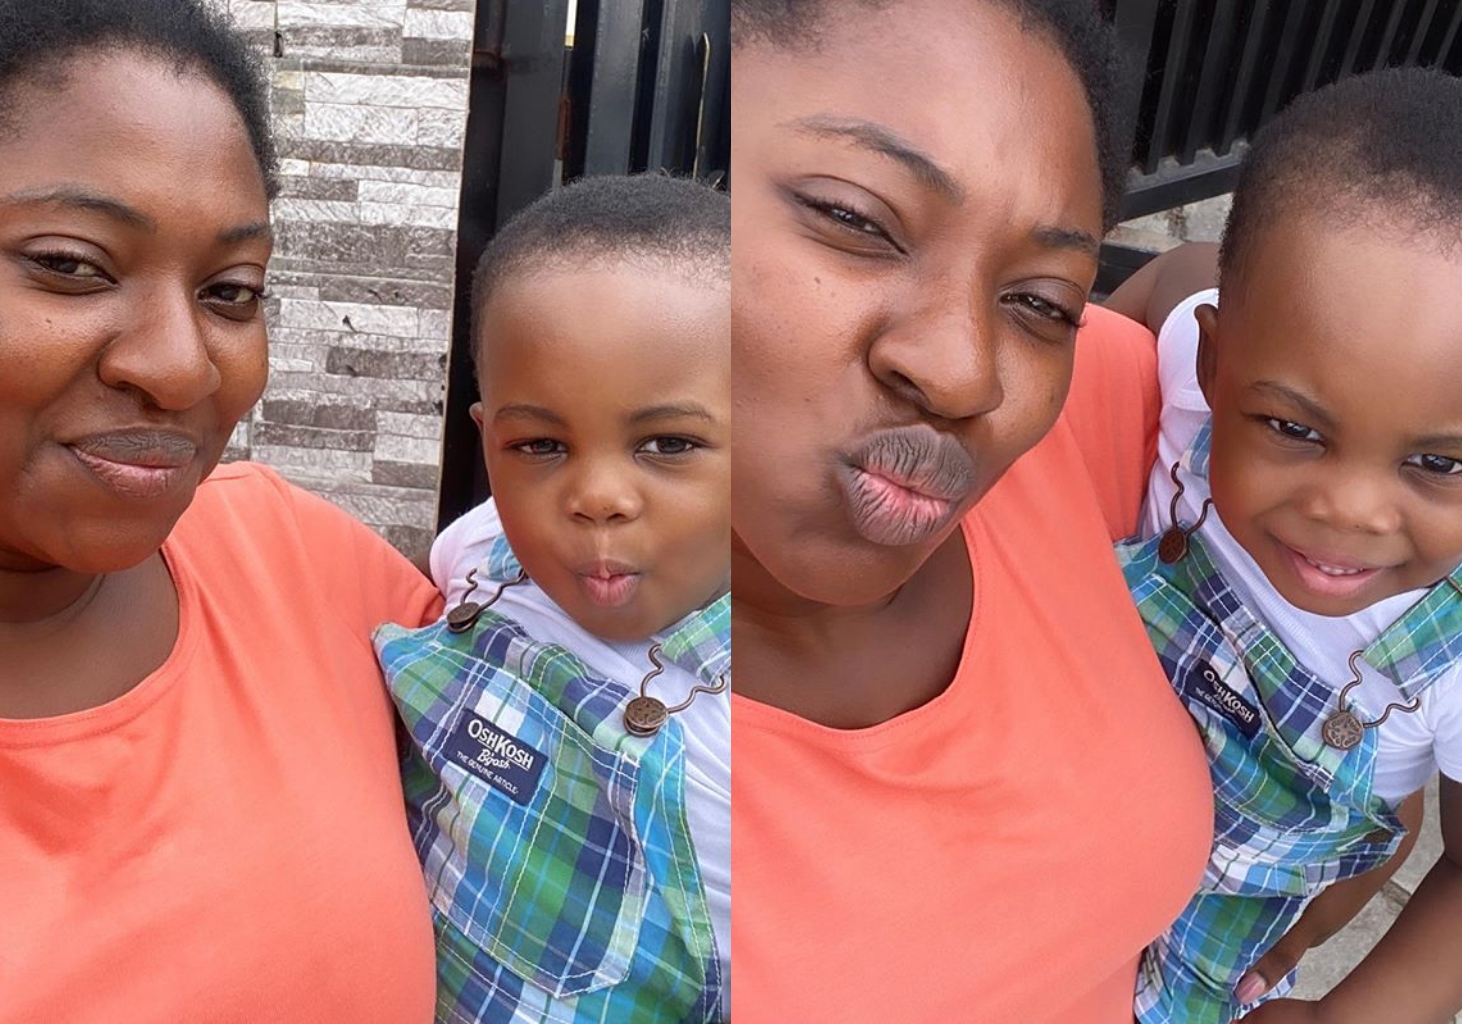 "We won't stop kissing" – Actress Yvonne Jegede and son shares priceless time (Photos)